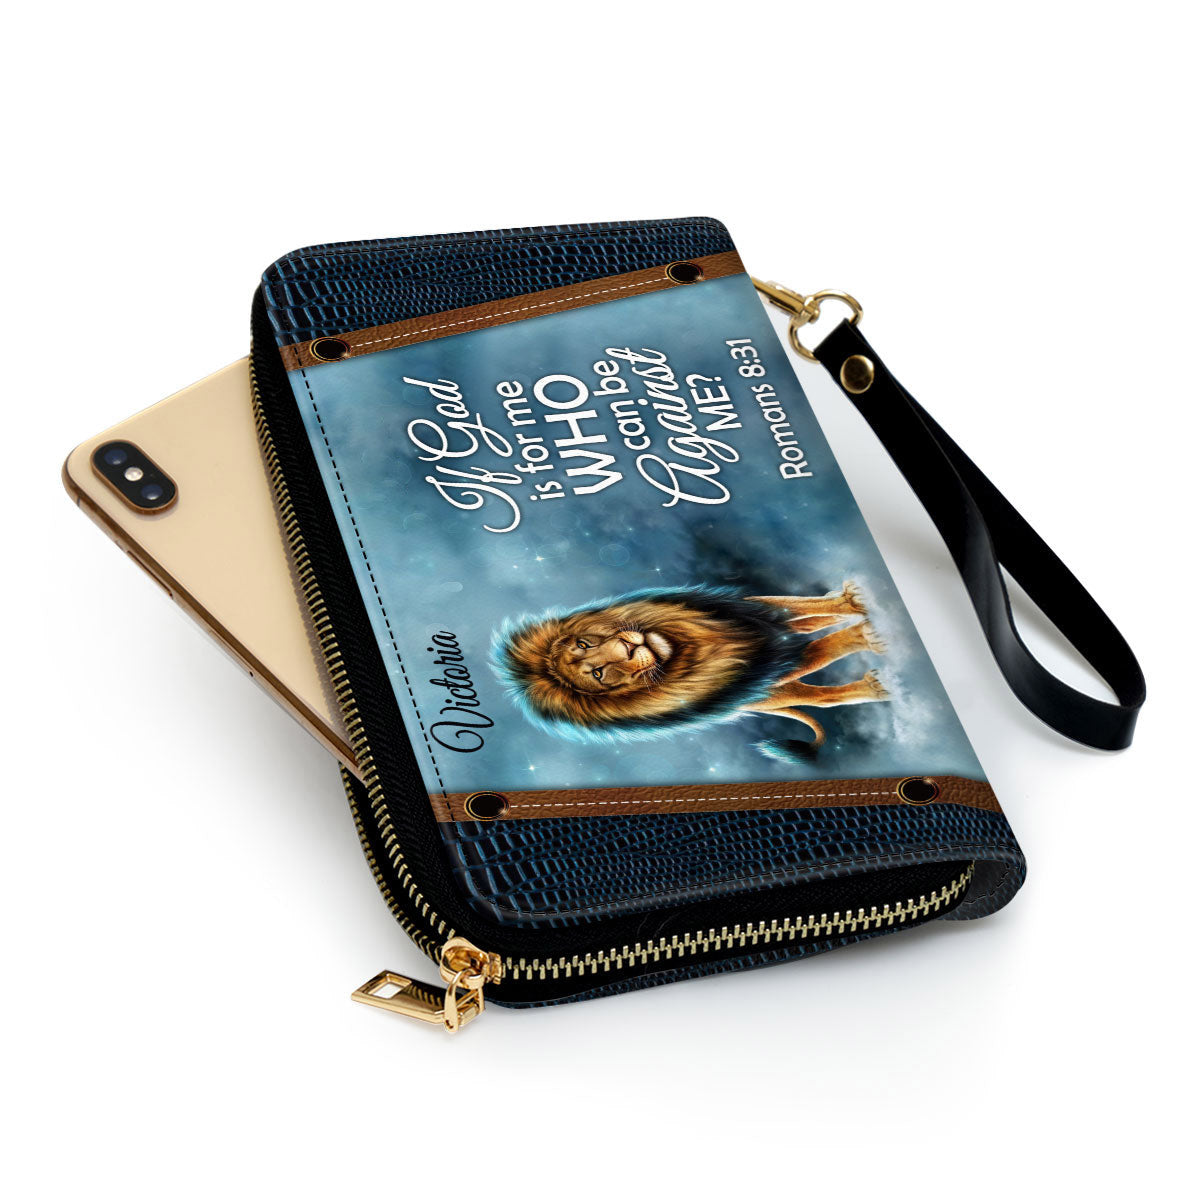 Women Clutch Purse - If God Is For Me Who Can Be Against Me - Special Personalized Clutch Purse